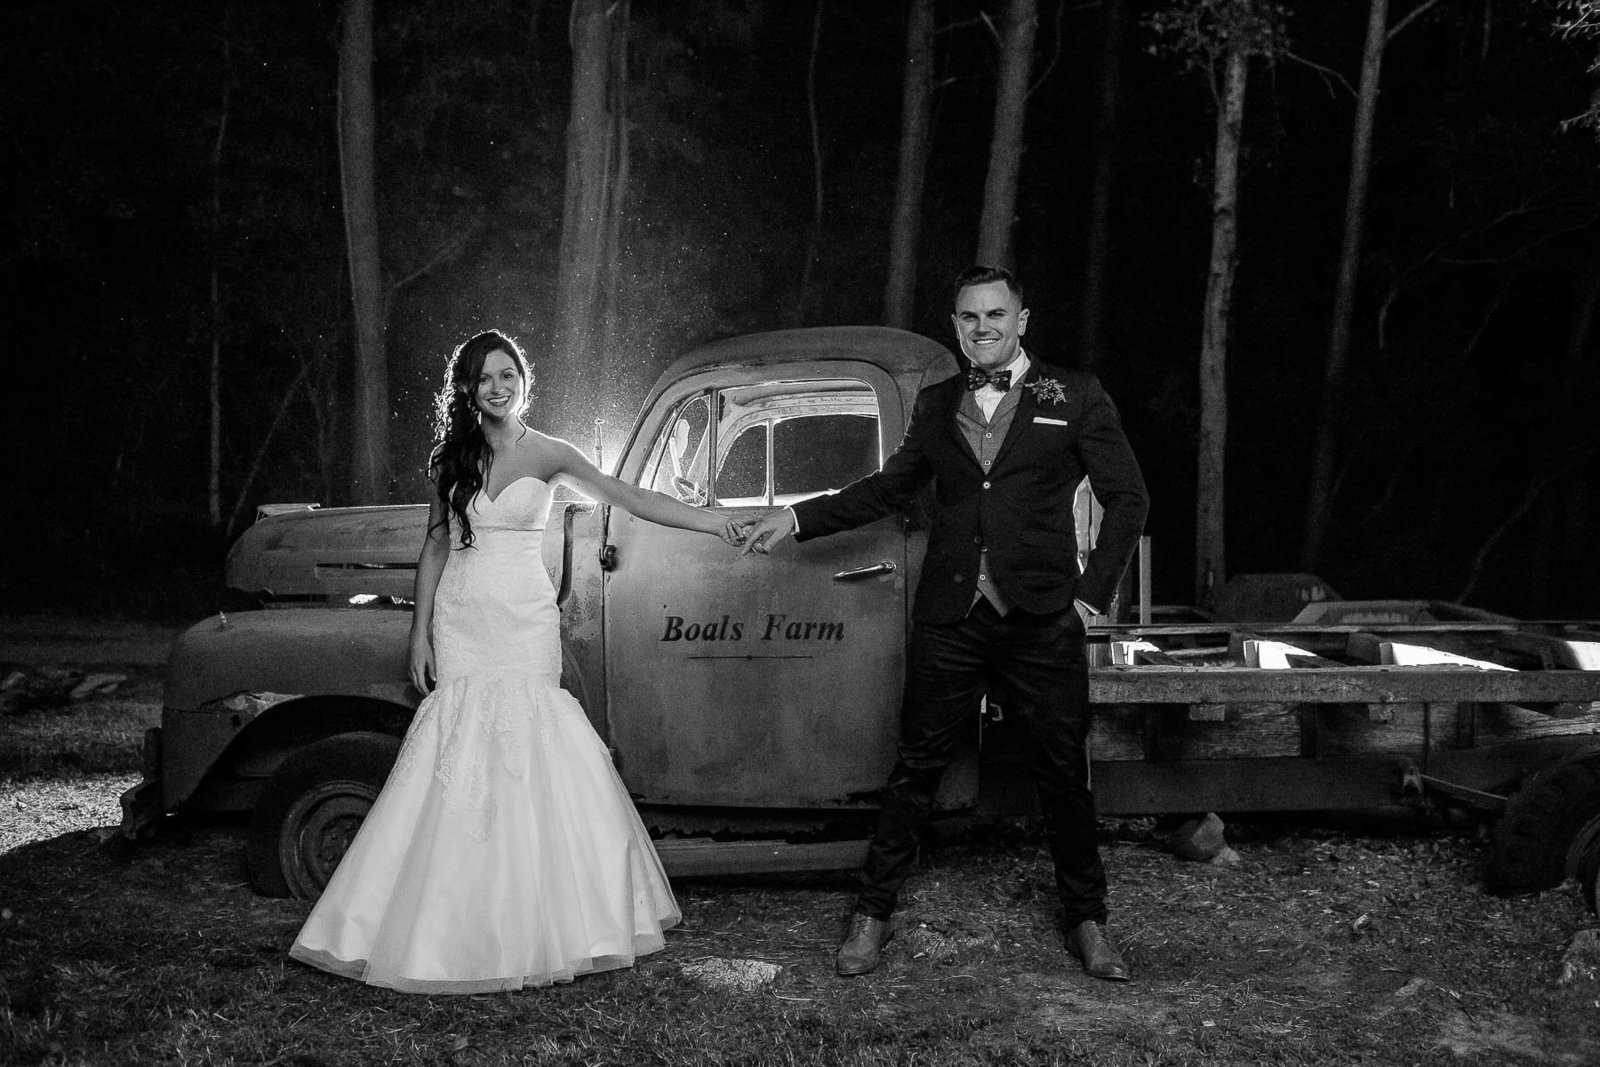 Bride and groom pose by red rustic truck at night, Boals Farm, Charleston, South Carolina